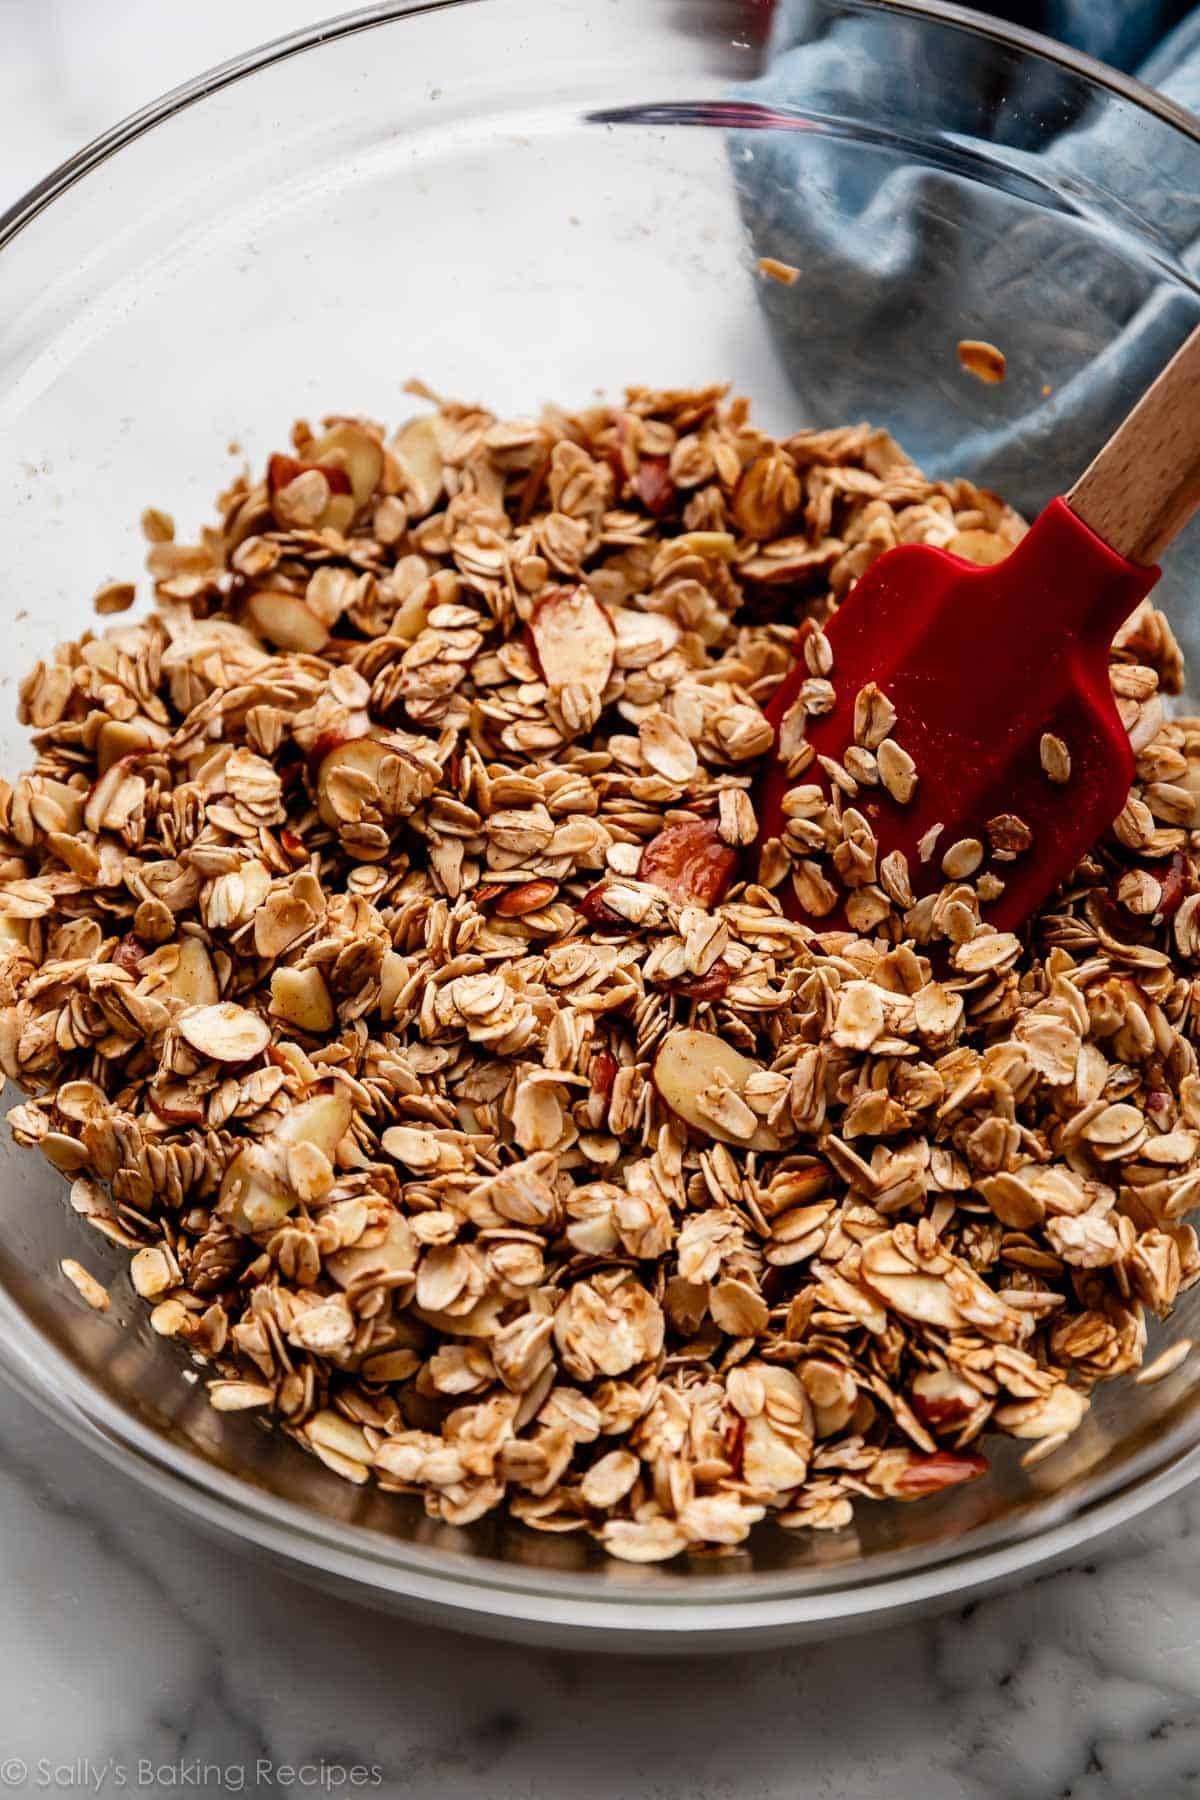 wet granola mixture mixed together in glass bowl with red spatula.